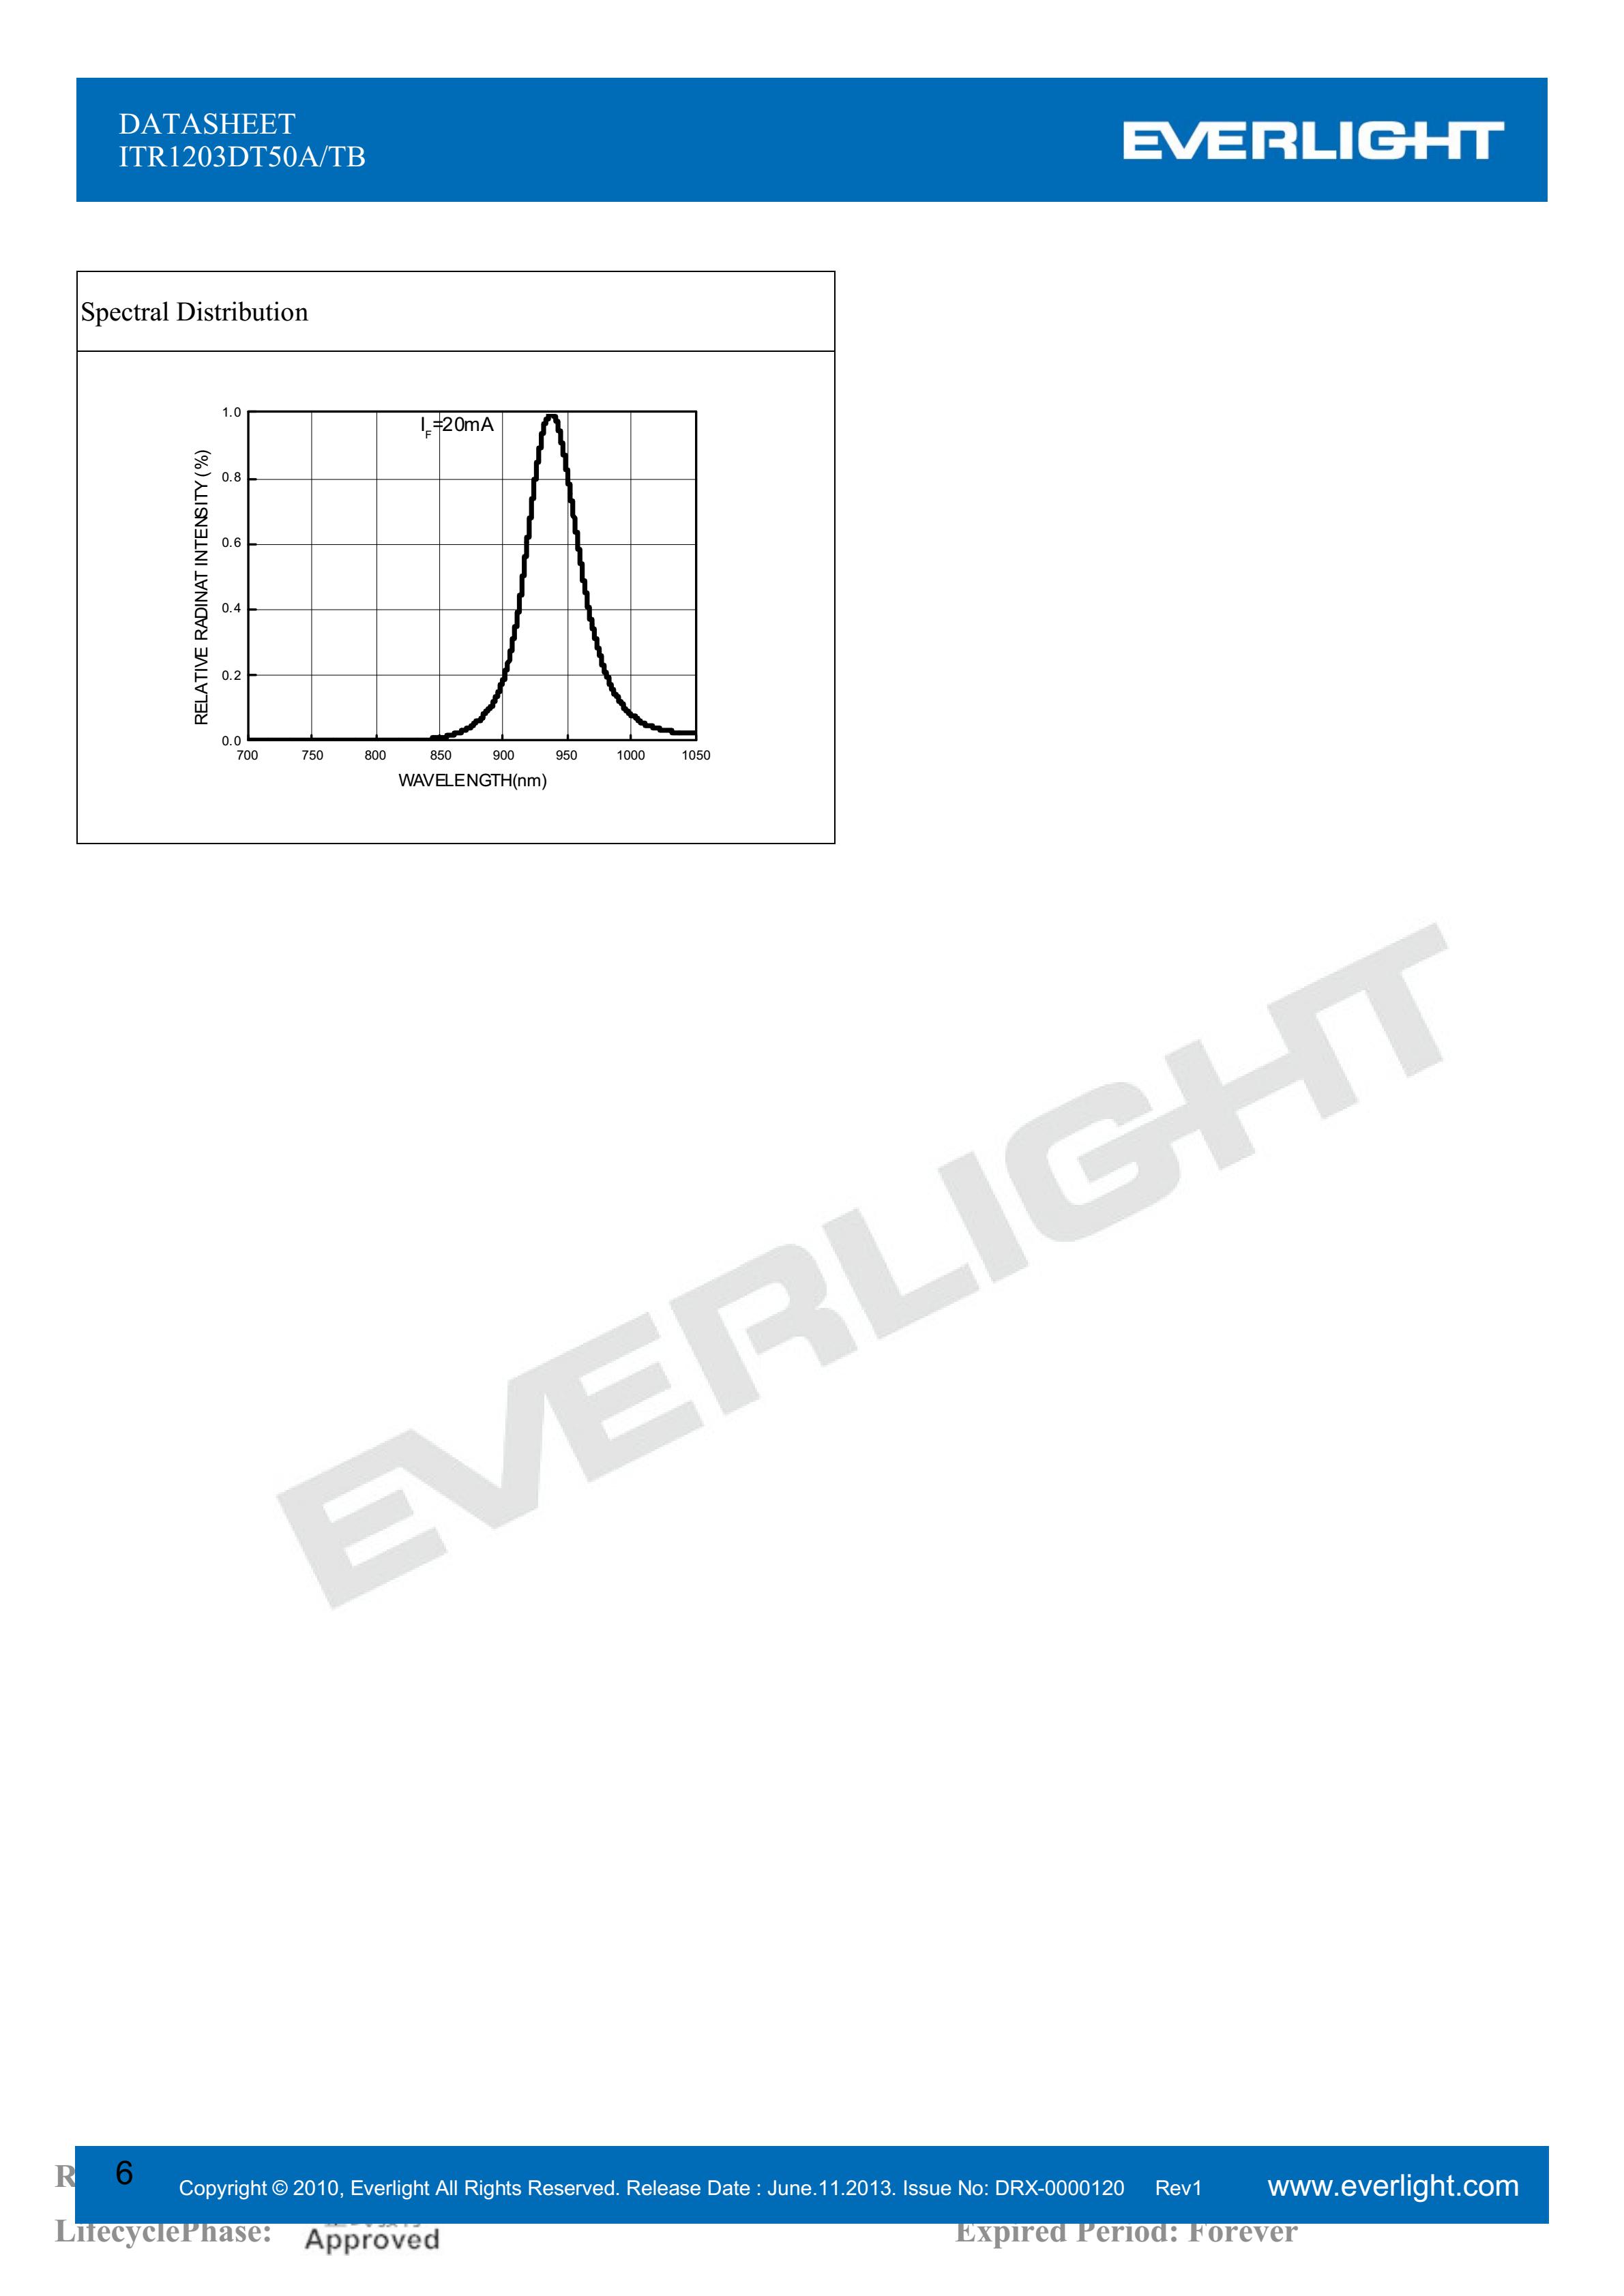 EVERLIGHT  Opto-electronic switch  ITR1203DT50A/TB Datashe